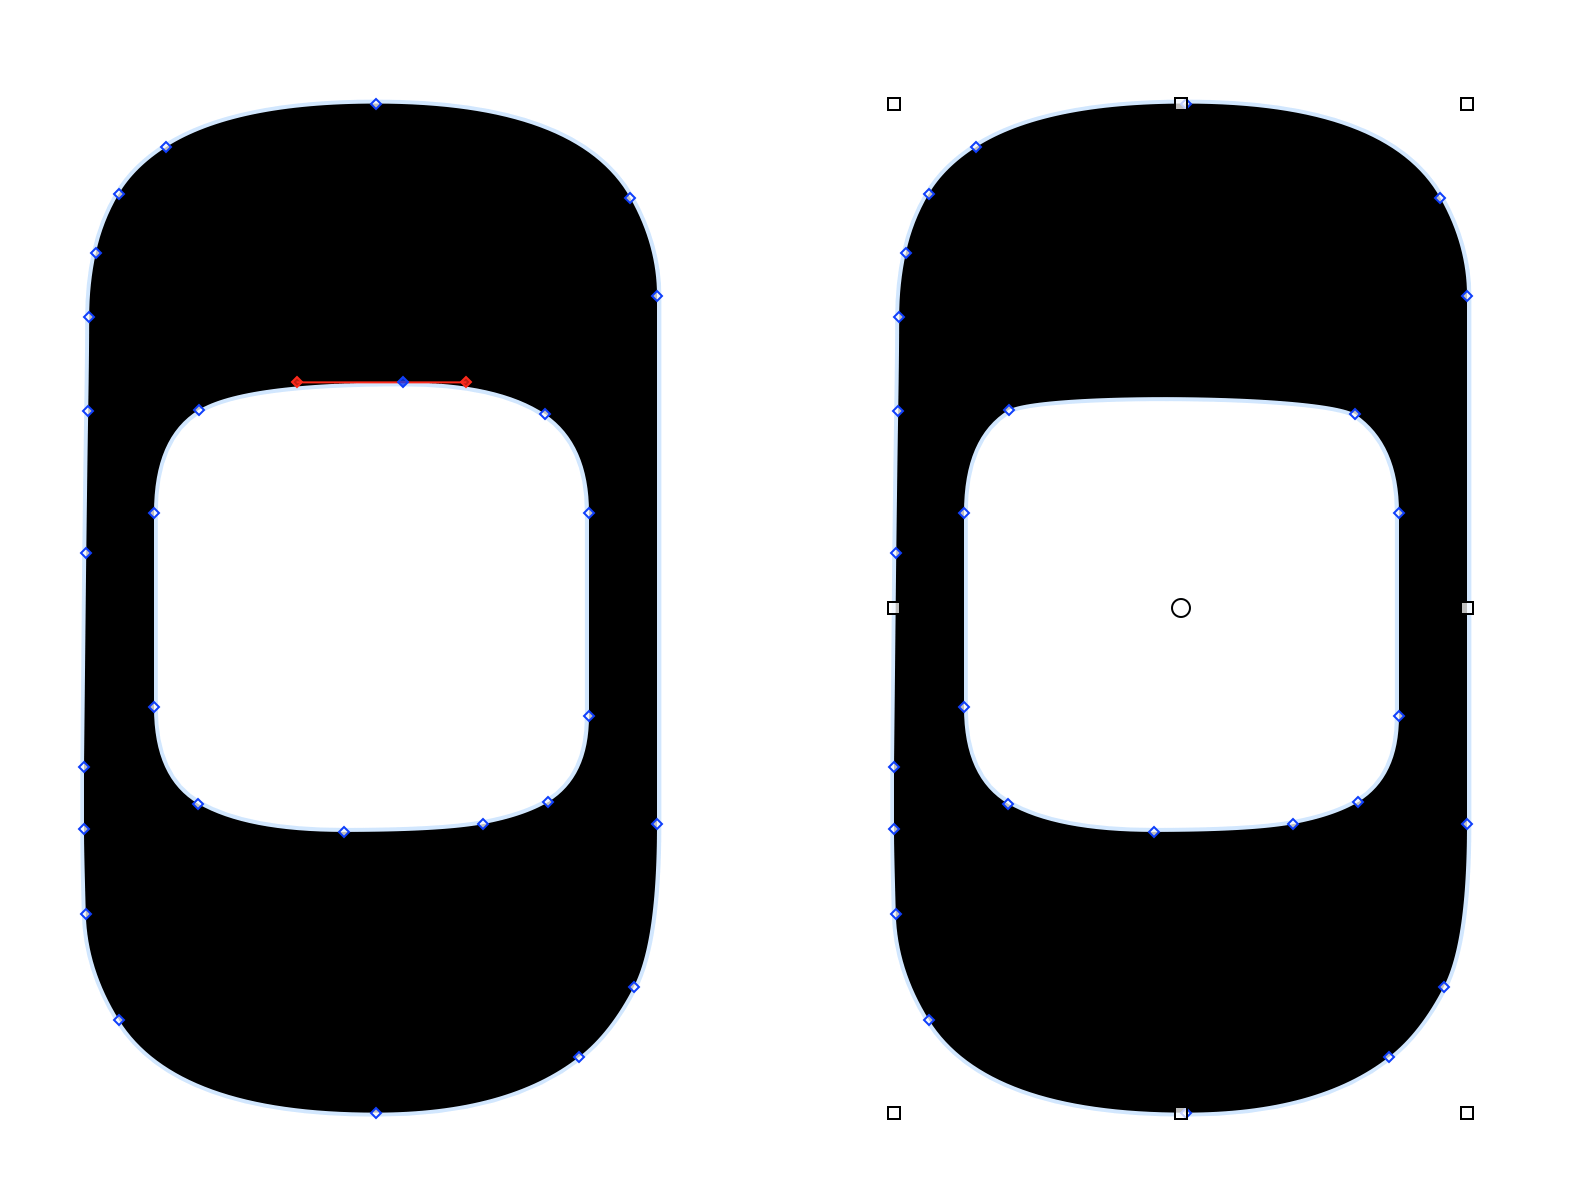 This shows two Oh characters side by side. The Oh on the left has a vector point selected along the top-inside of the shape. The Oh on the right shows that same Oh character after the selected vector point has been deleted.